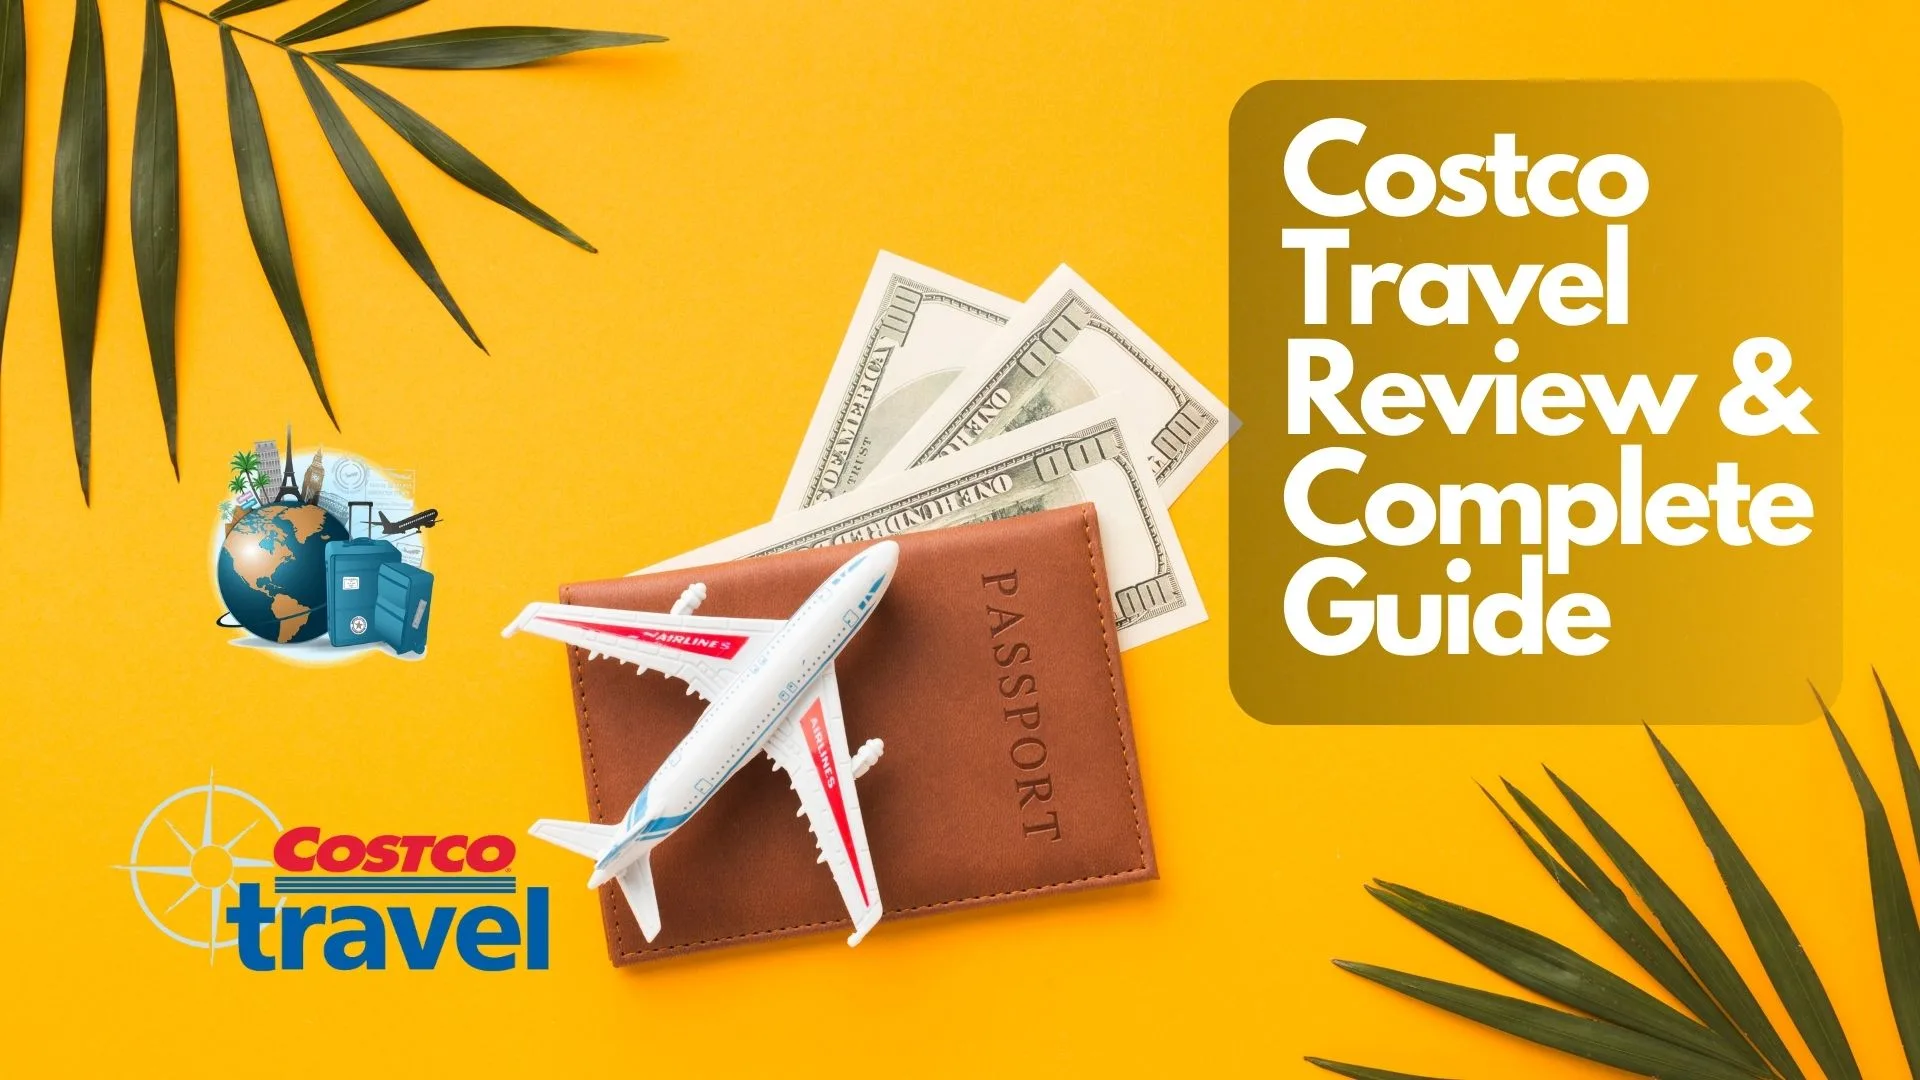 Costco Travel Review & Complete Guide Save Money on Your Travels with